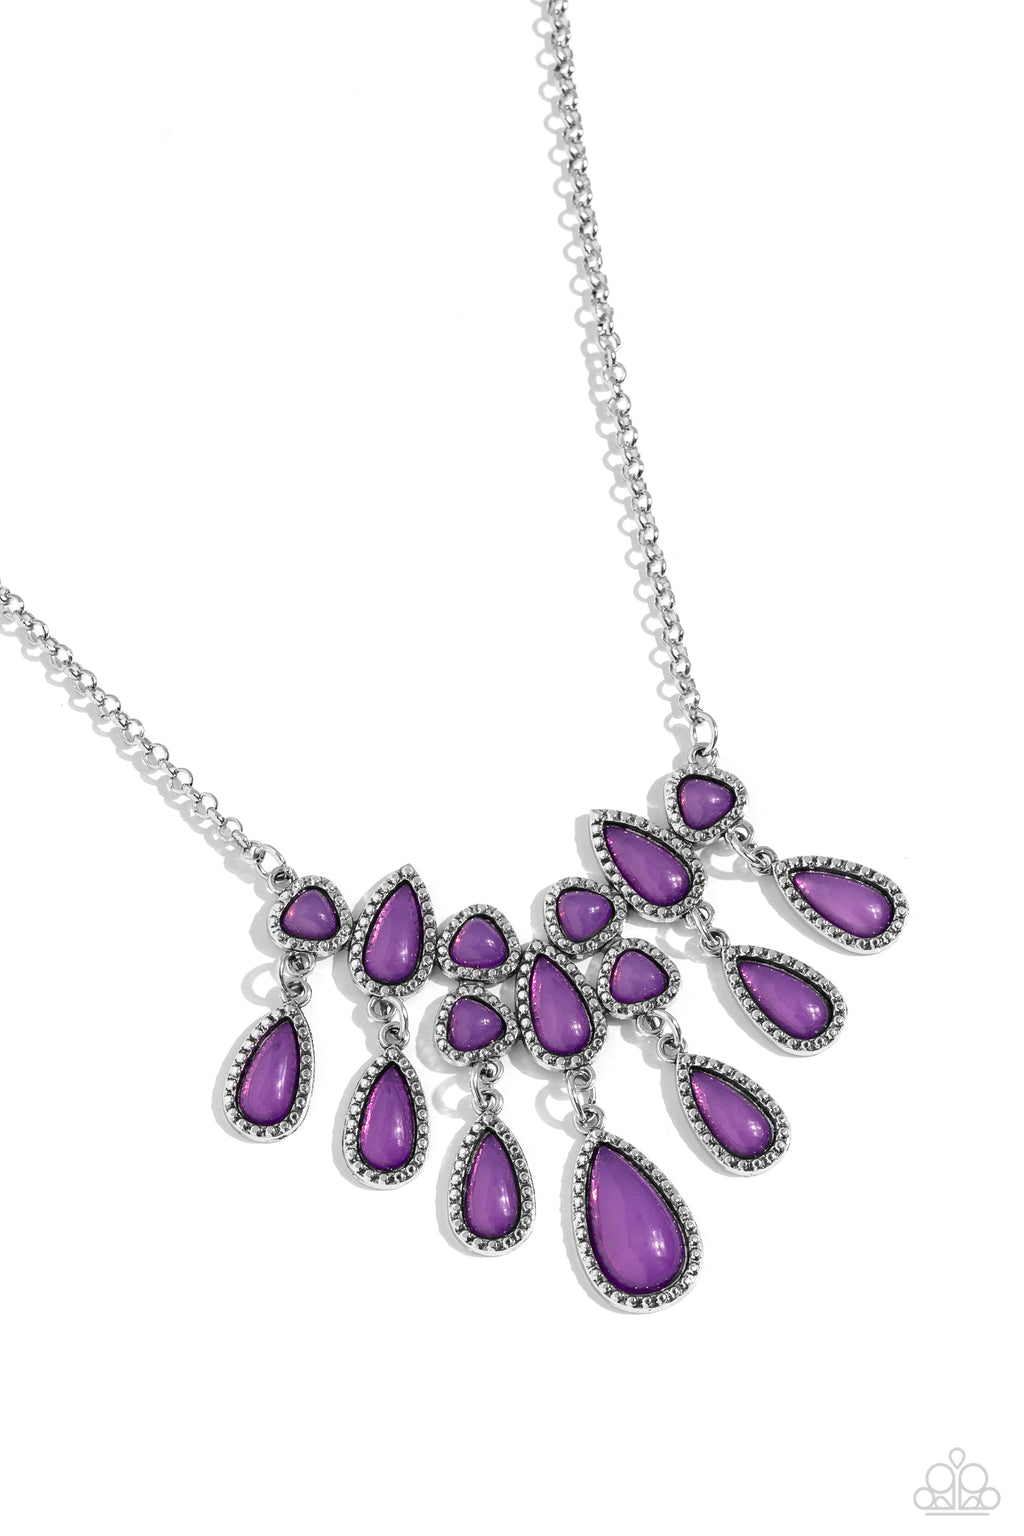 five-dollar-jewelry-exceptionally-ethereal-purple-necklace-paparazzi-accessories